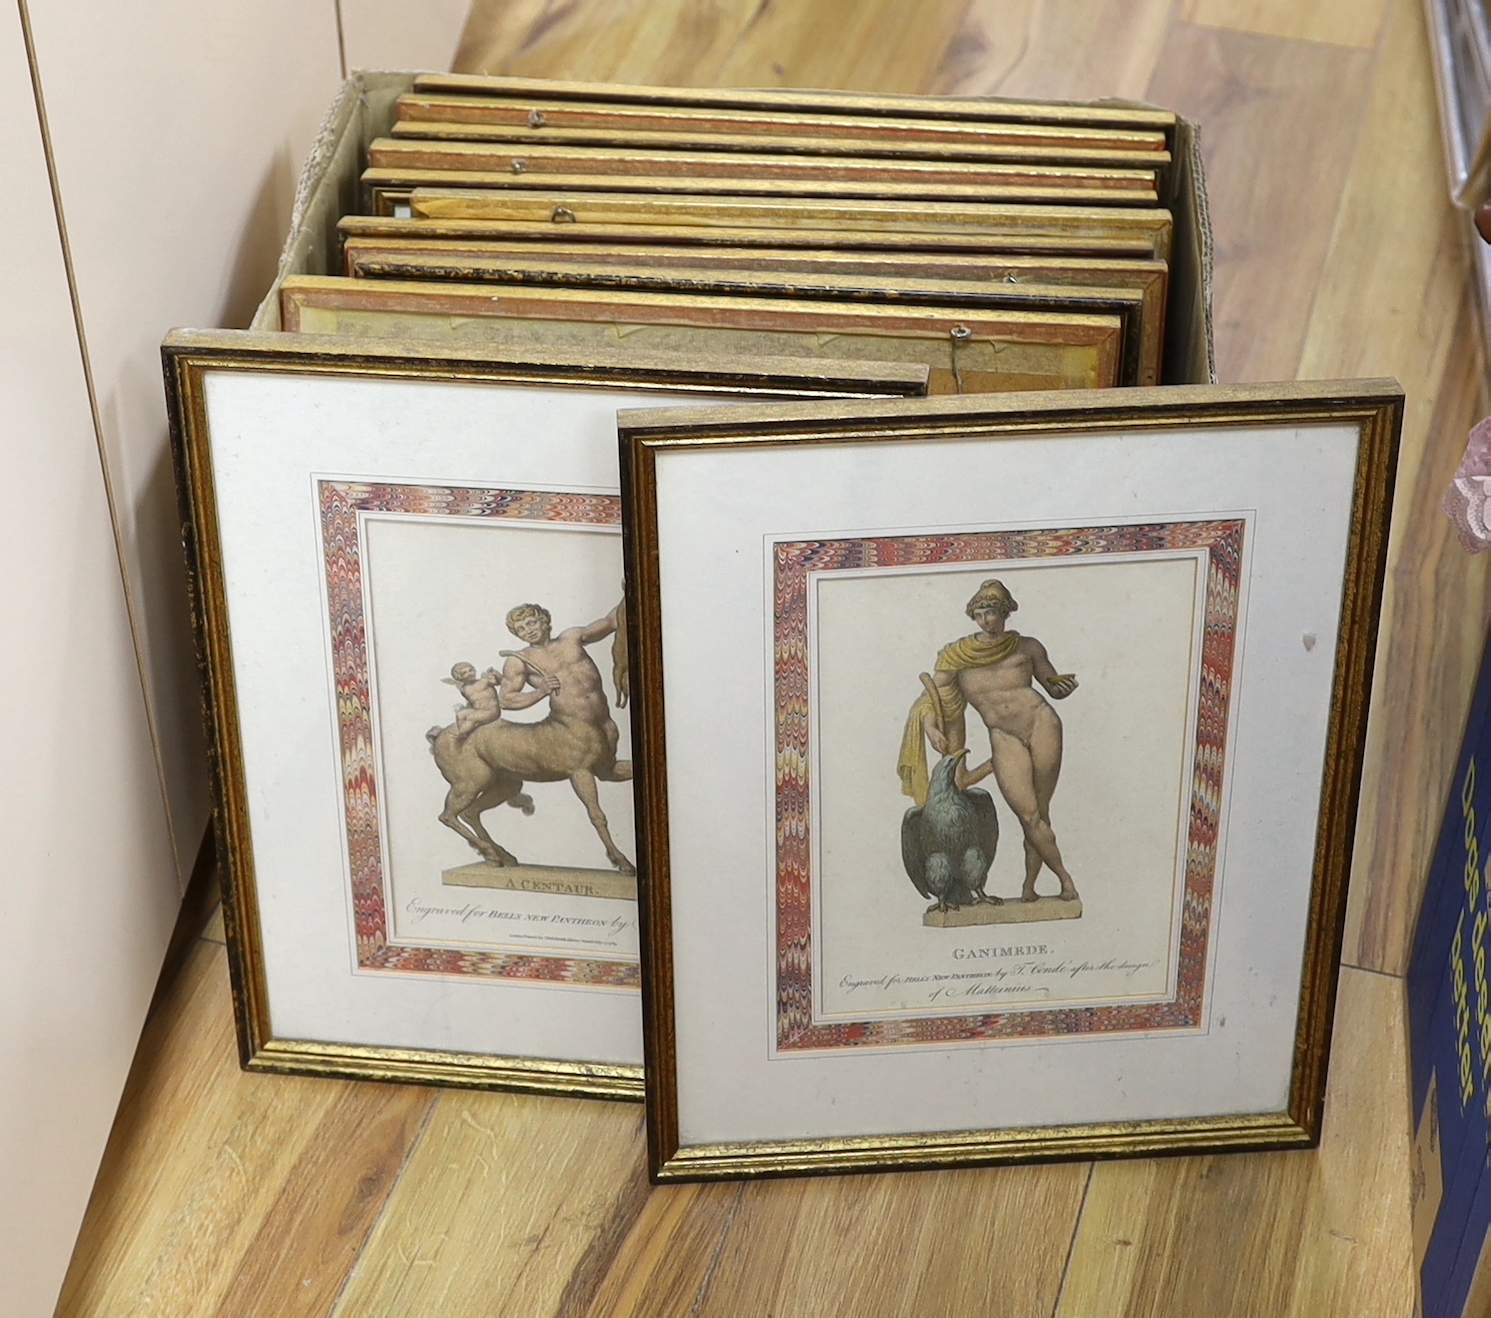 J Condé, set of twelve colour engravings, for Bells New Pantheon, some printed for John Bell, 1789, including ‘A centaur ‘and ‘The Graces’, each 23 x 16cm